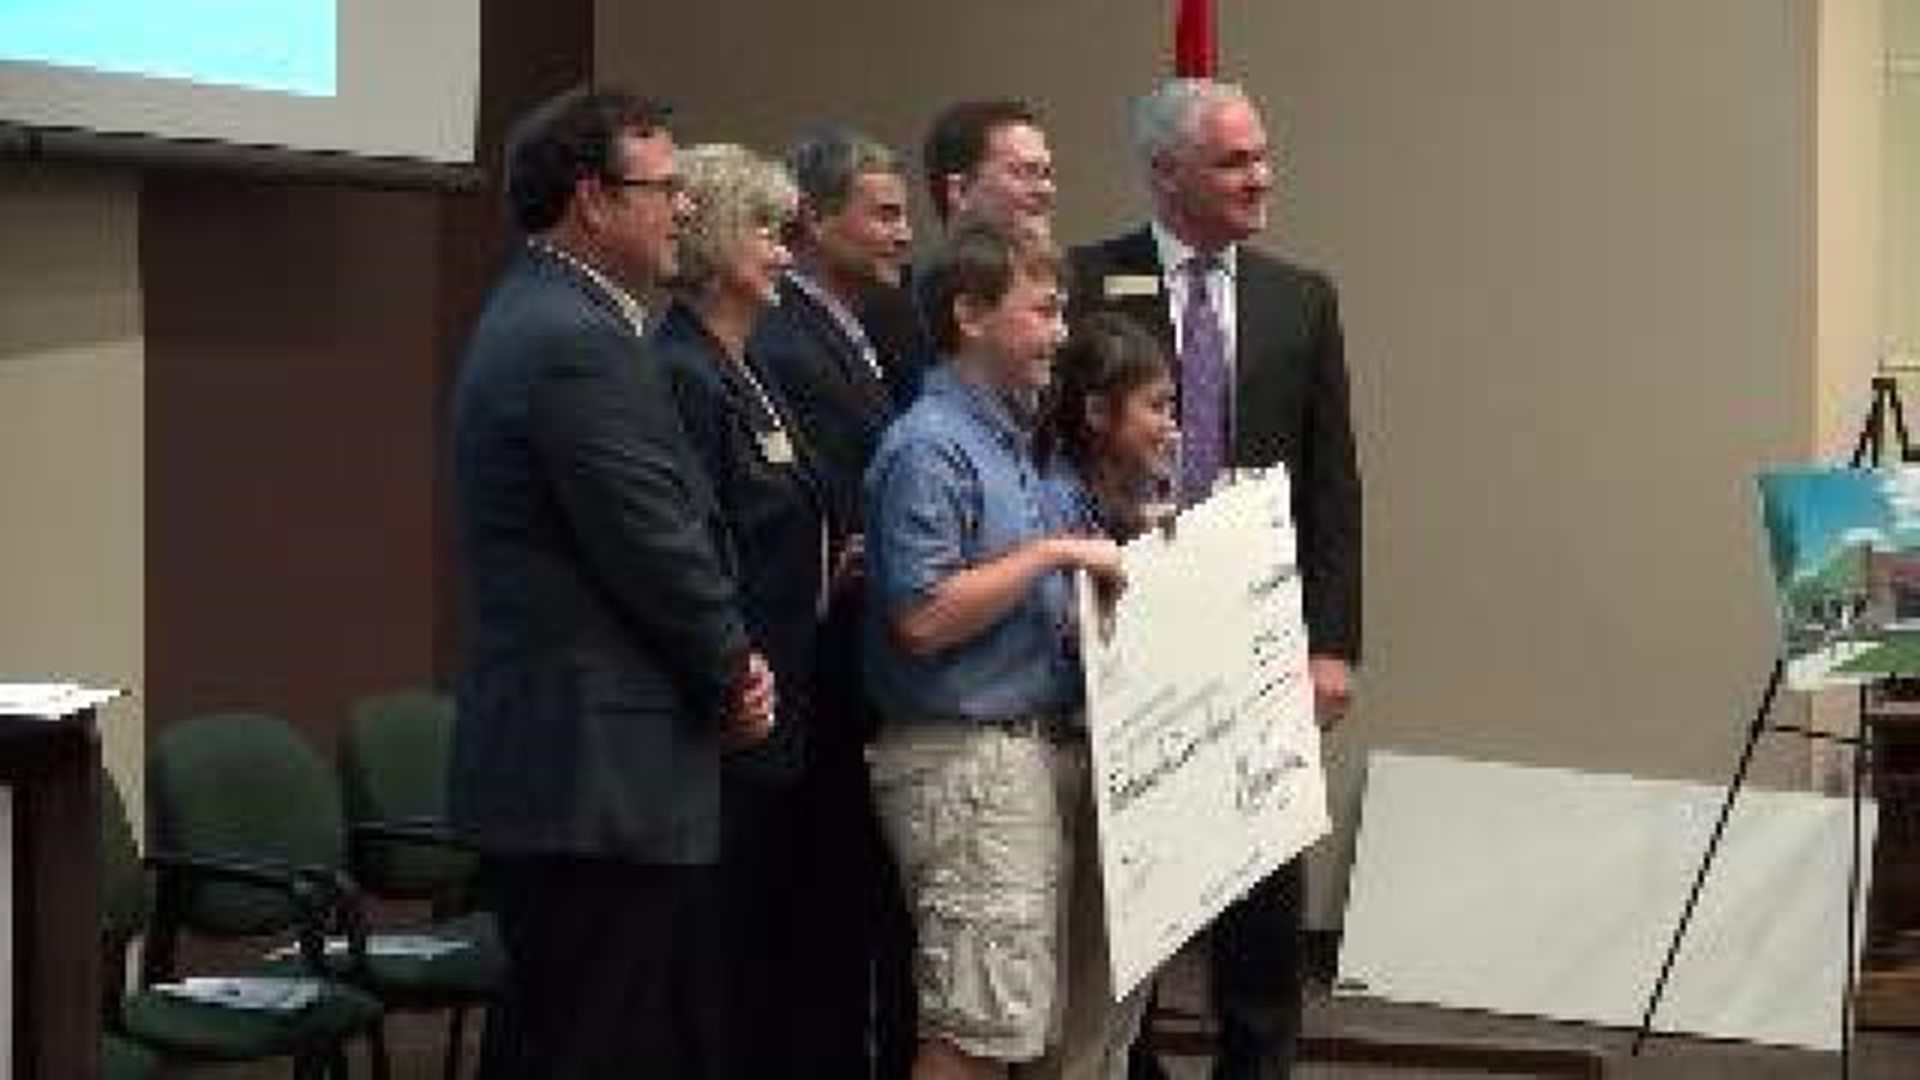 $1.5 Million Donated to New Child Protection Training Center